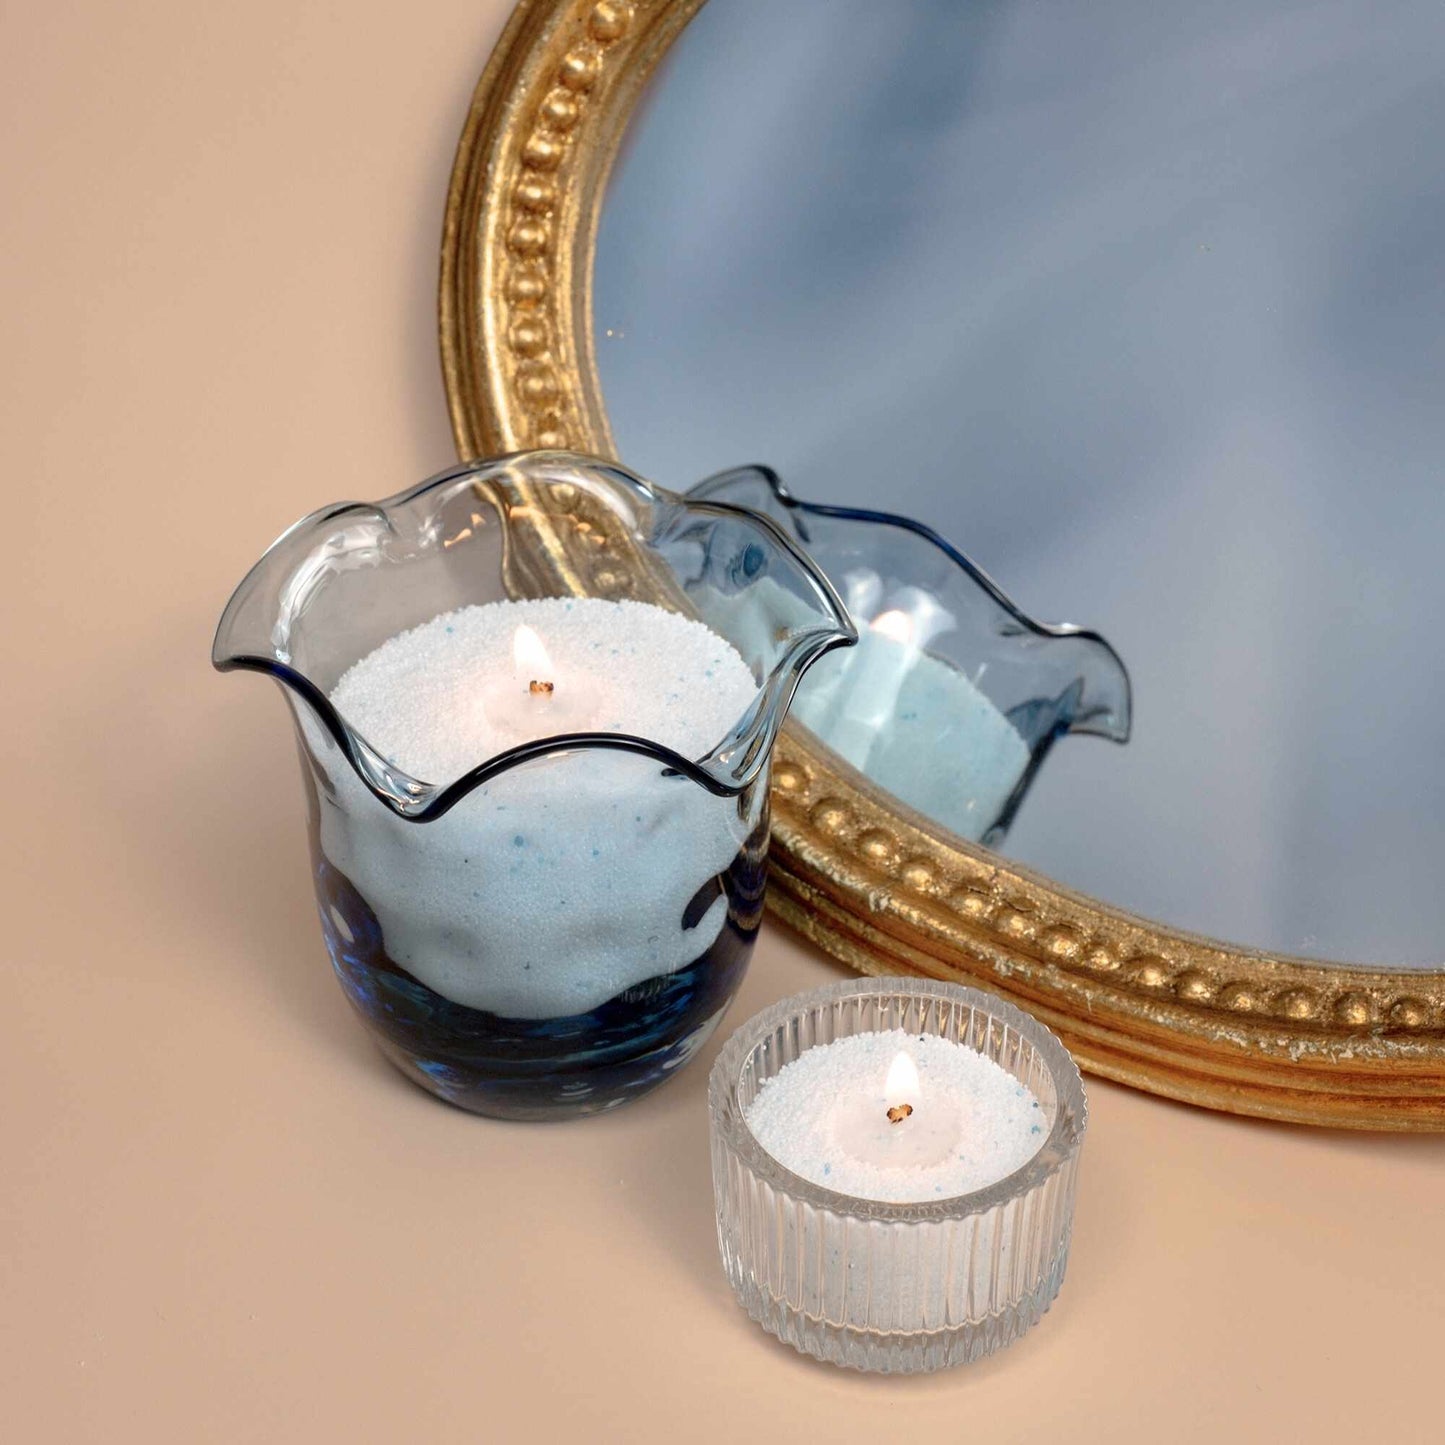 Candles lighting in a blue glass holder and a teacup light, highlighting the versatility of sand candles.